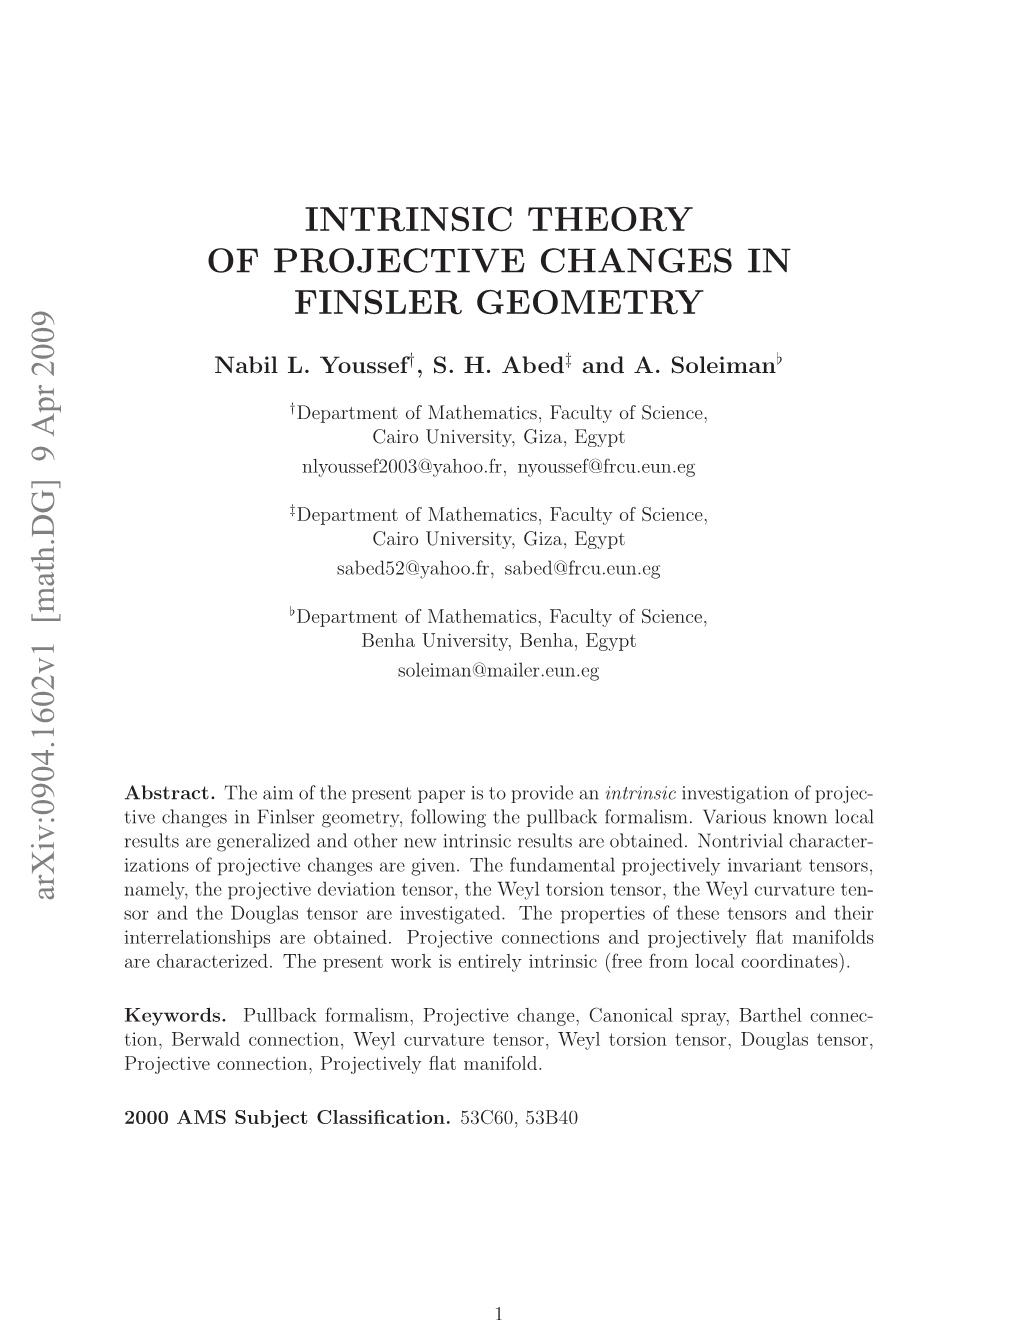 Intrinsic Theory of Projective Changes in Finsler Geometry Following the Pullback Approach